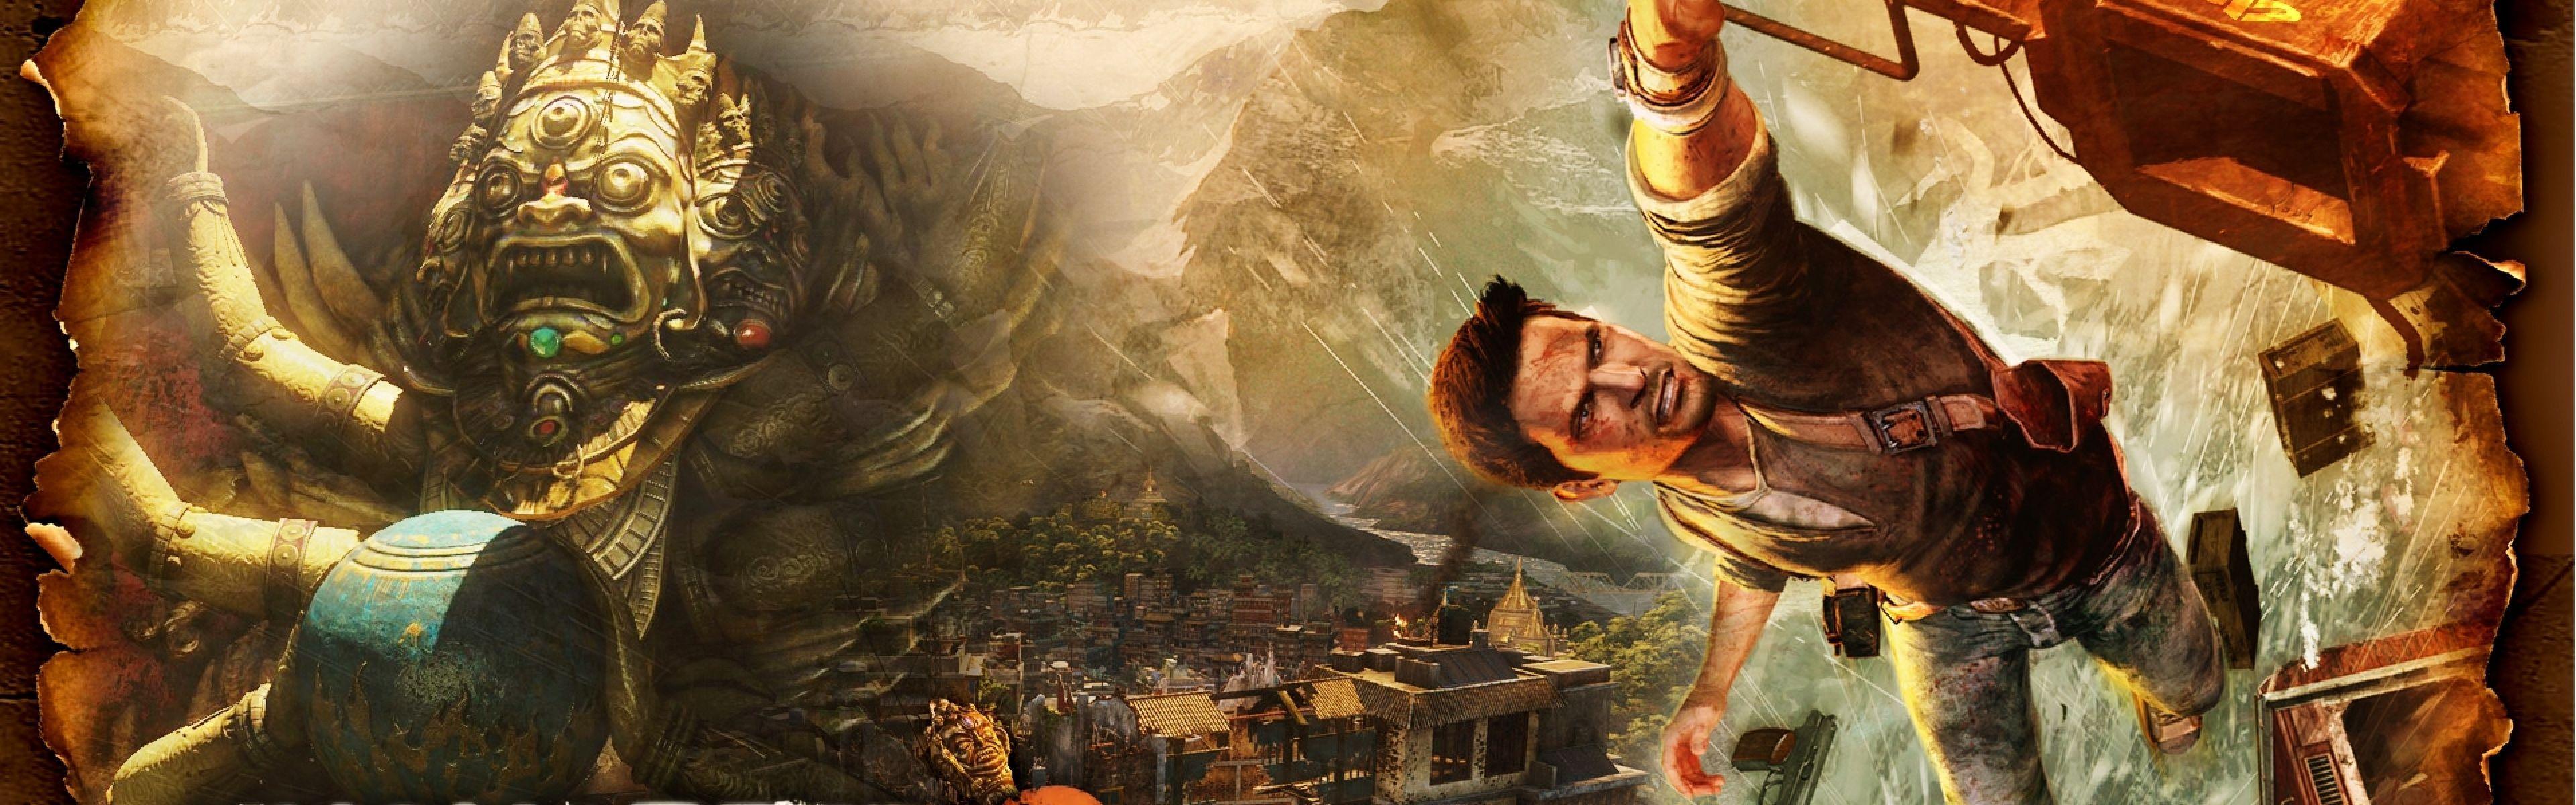 Download Wallpaper 3840x1200 Uncharted 2 among thieves, City